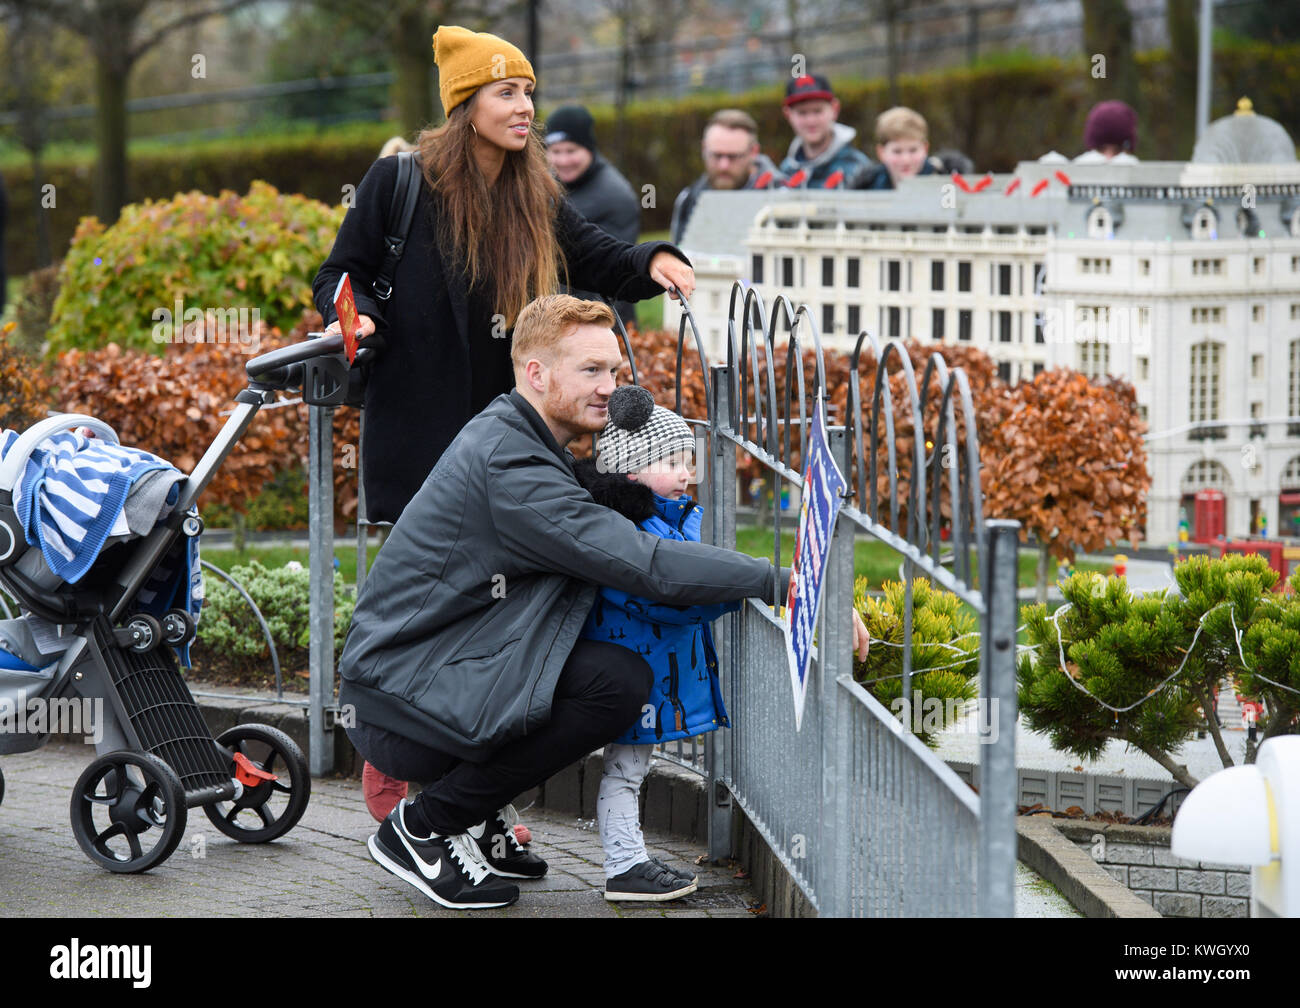 LEGOLAND at Christmas VIP event London  Featuring: Greg Rutherford and his partner Susie Verrill and their children Milo and Rex visit LEGOLANDs Christmas event at the LEGOLAND® Windsor Resort Where: London, United Kingdom When: 03 Dec 2017 Credit: WENN.com Stock Photo